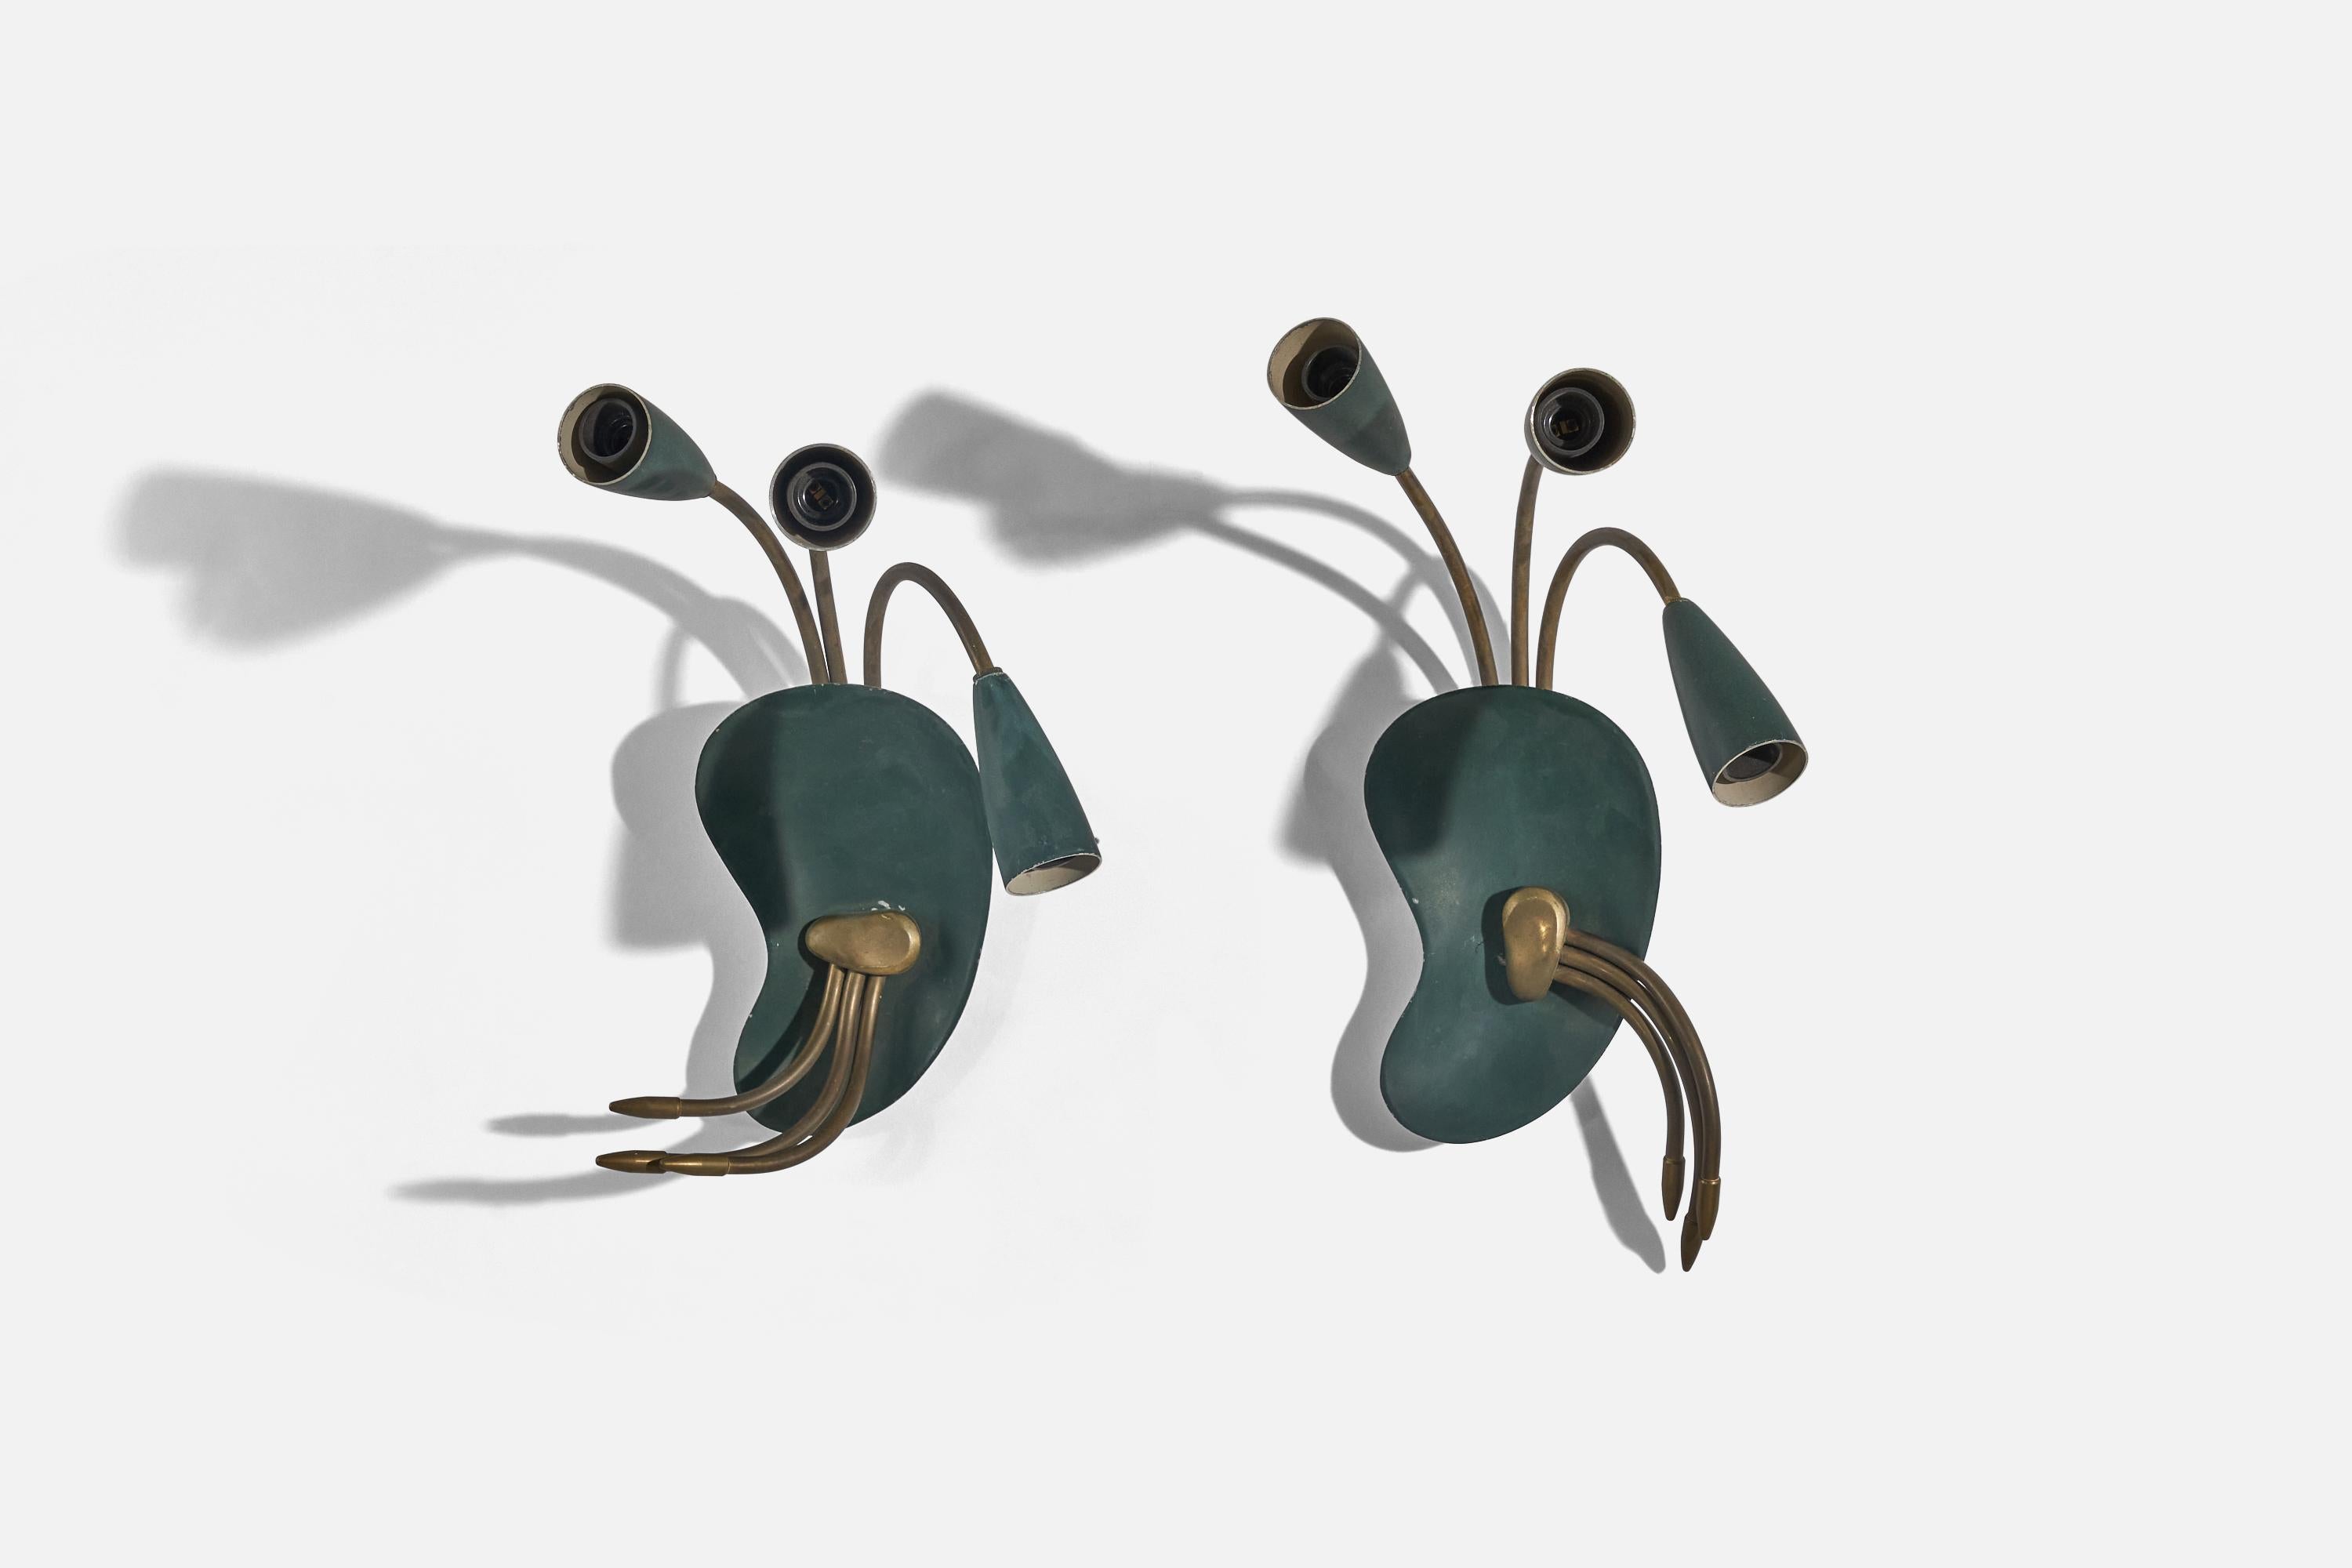 A pair of brass and green lacquered metal wall lights designed and produced by an Italian designer, Italy, 1950s.

Dimensions of back plate (inches) : 4.25 x 2.87 x 0.68 (H x W x D)

Currently illustrated without lightbulbs installed. Installing